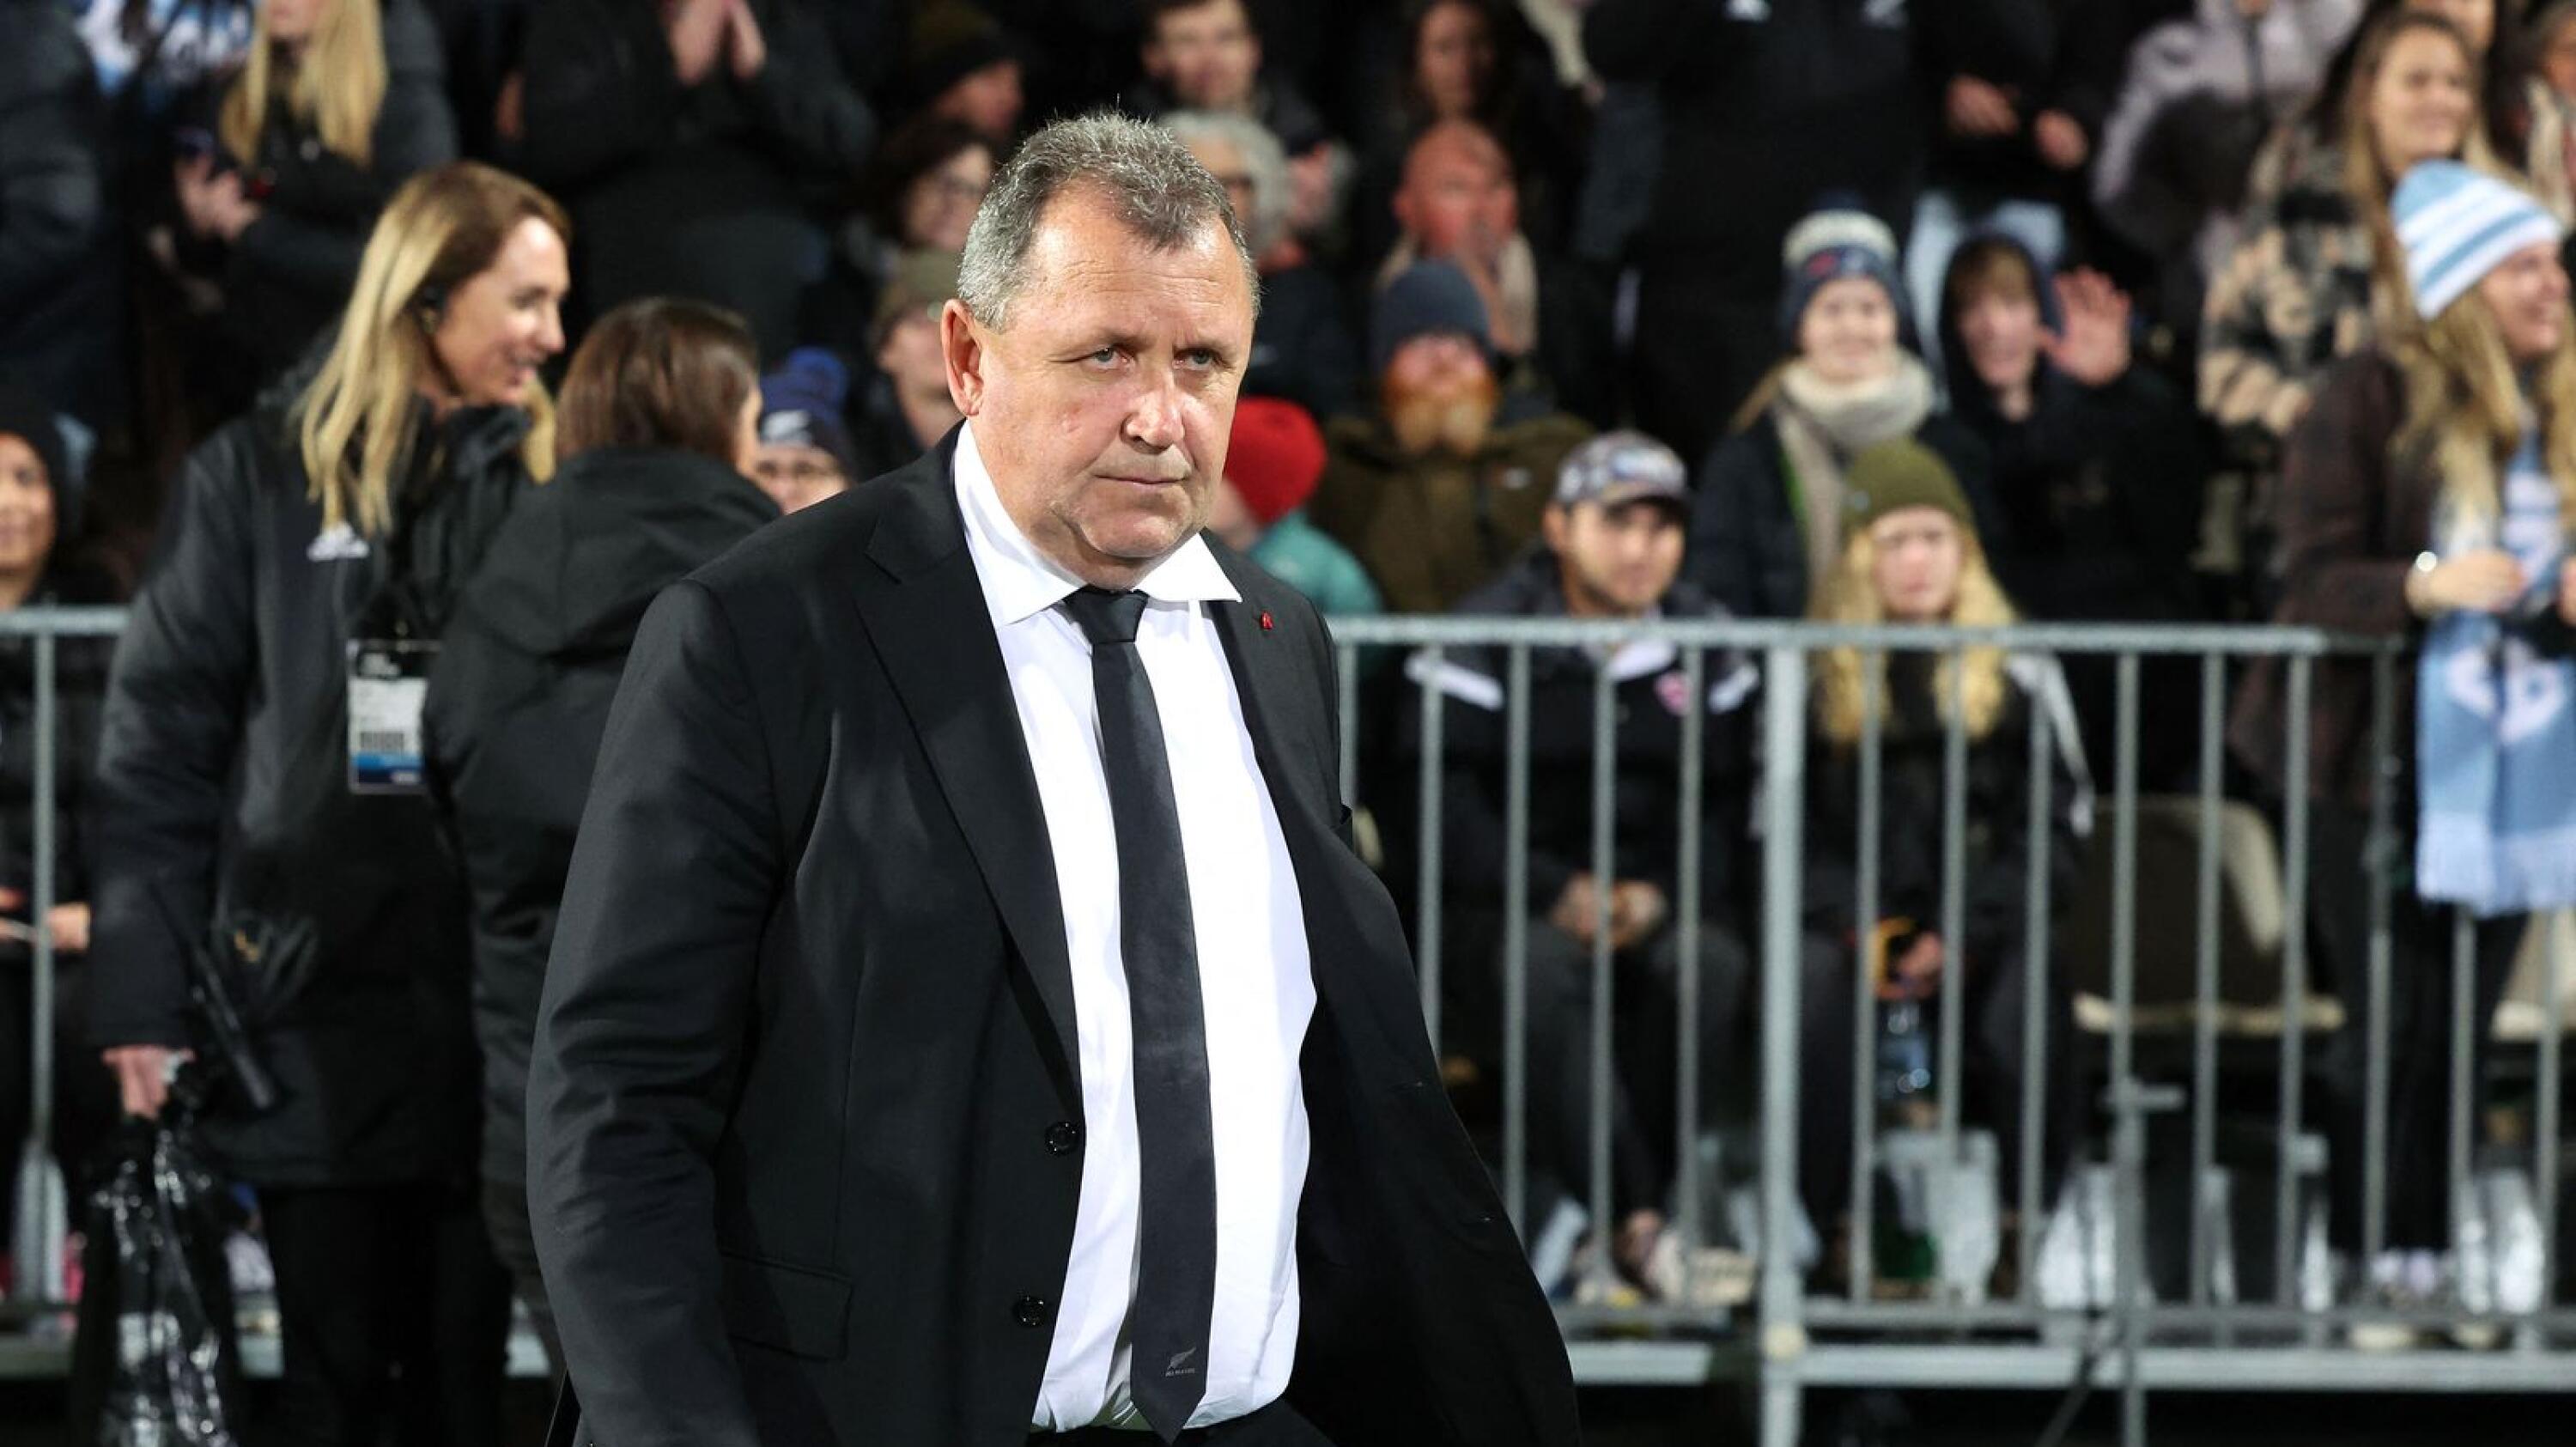 New Zealand head coach Ian Foster walks onto the field after their loss during the rugby union Test match between New Zealand and Argentina at Orangetheory Stadium in Christchurch